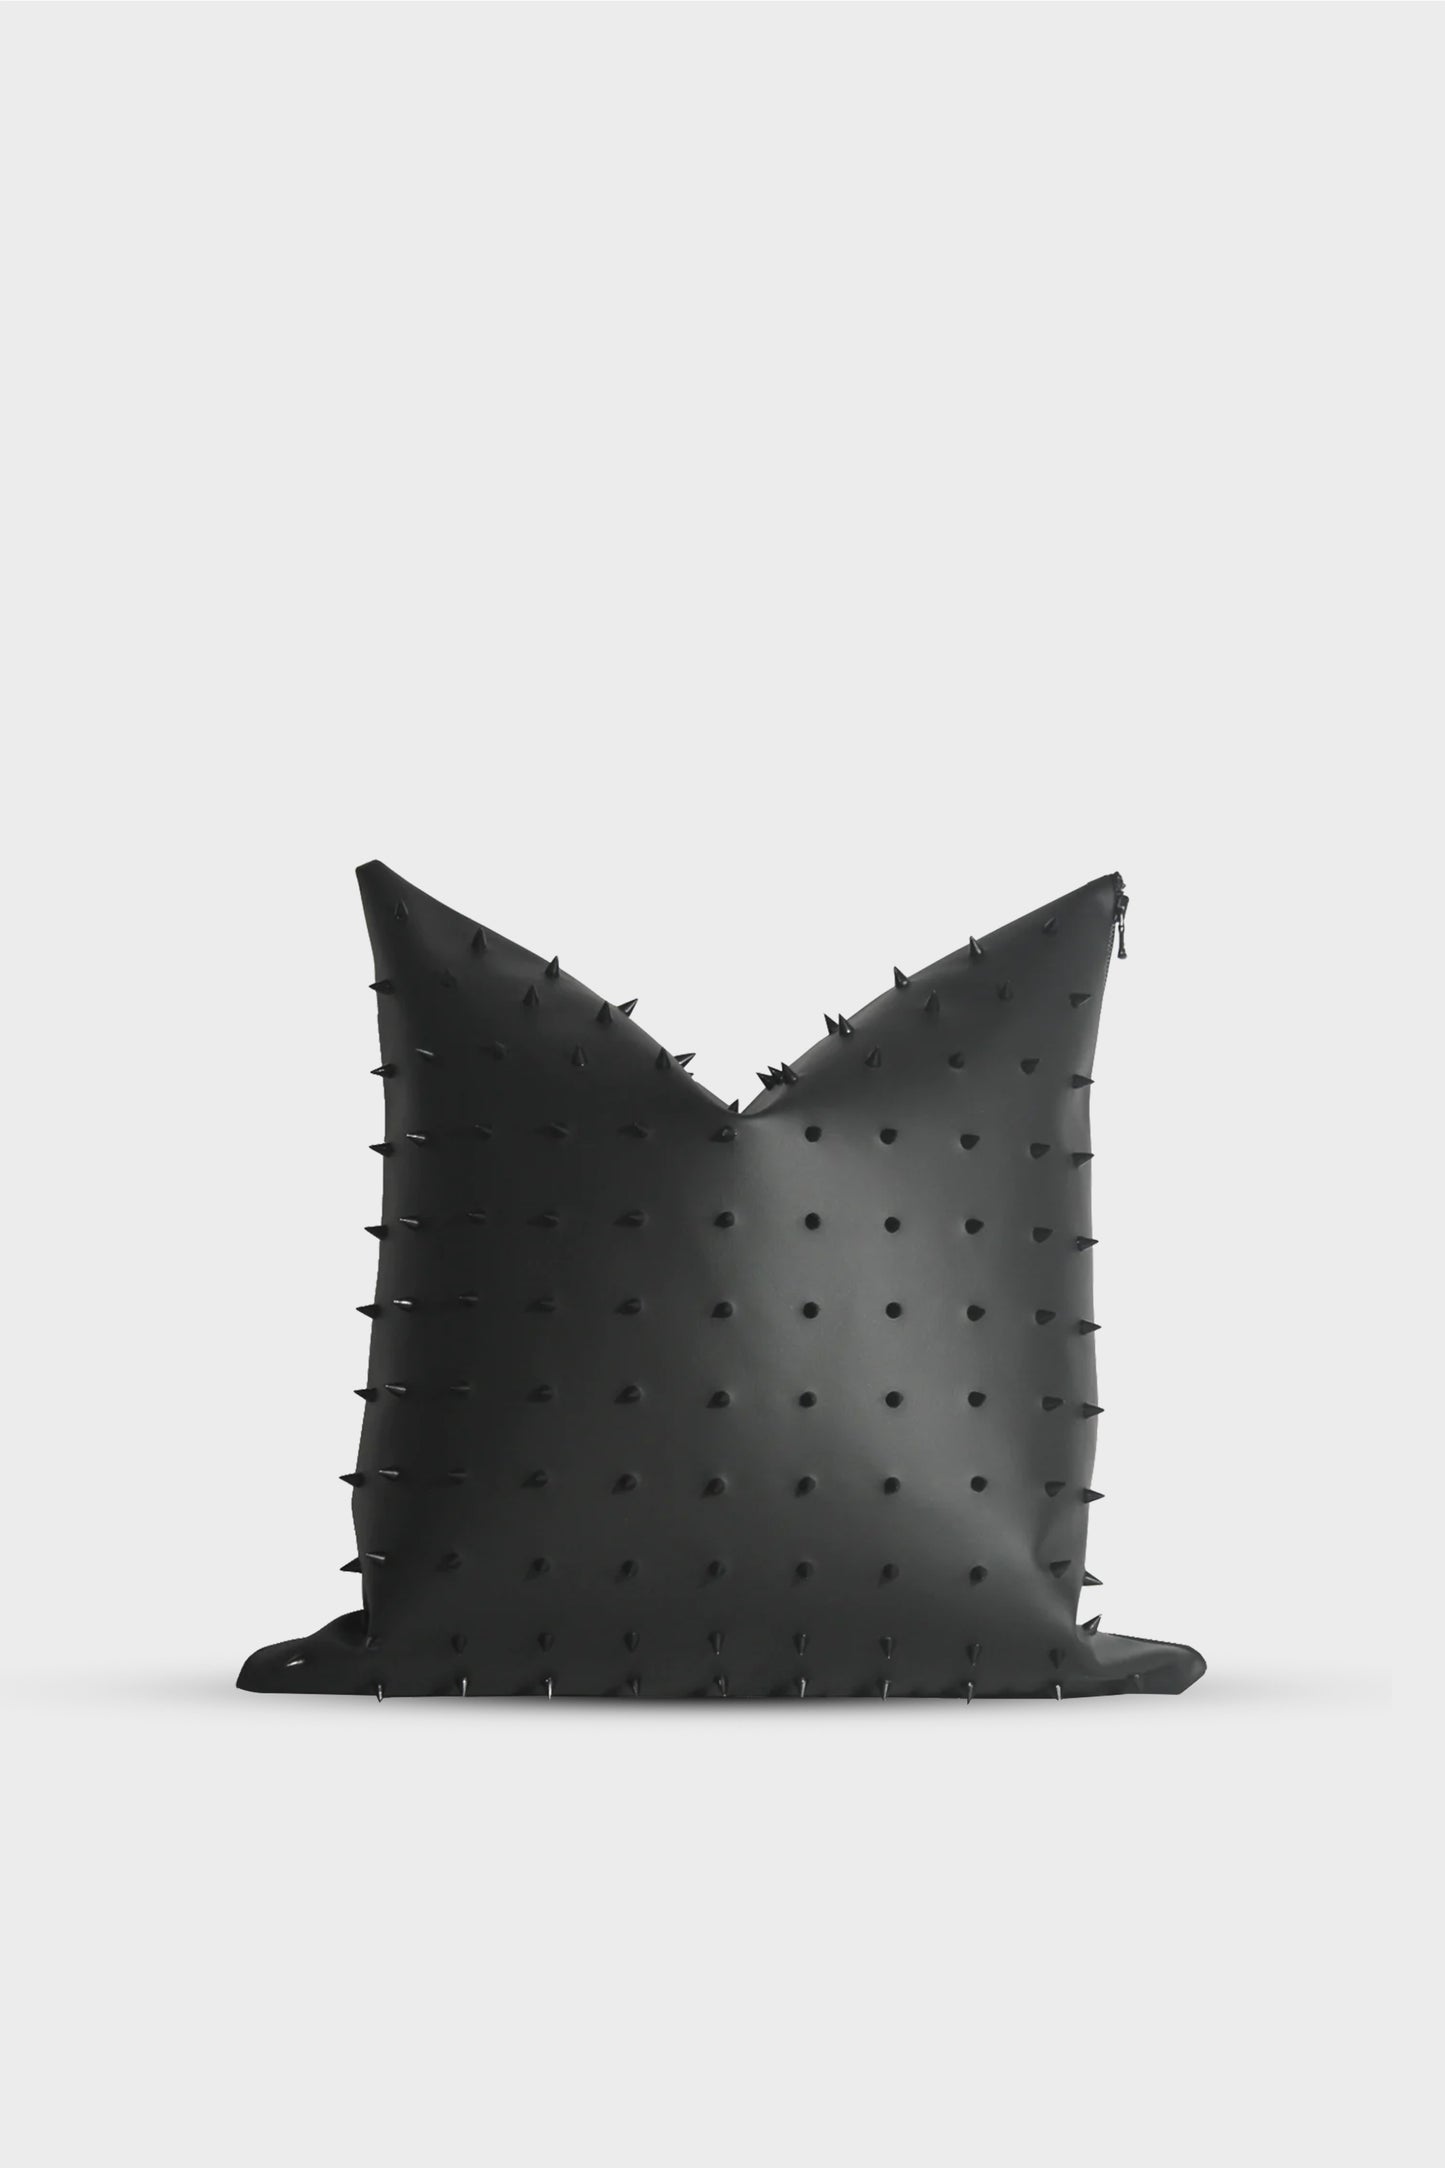 NIGHTMARE | Black Spiked Pillow